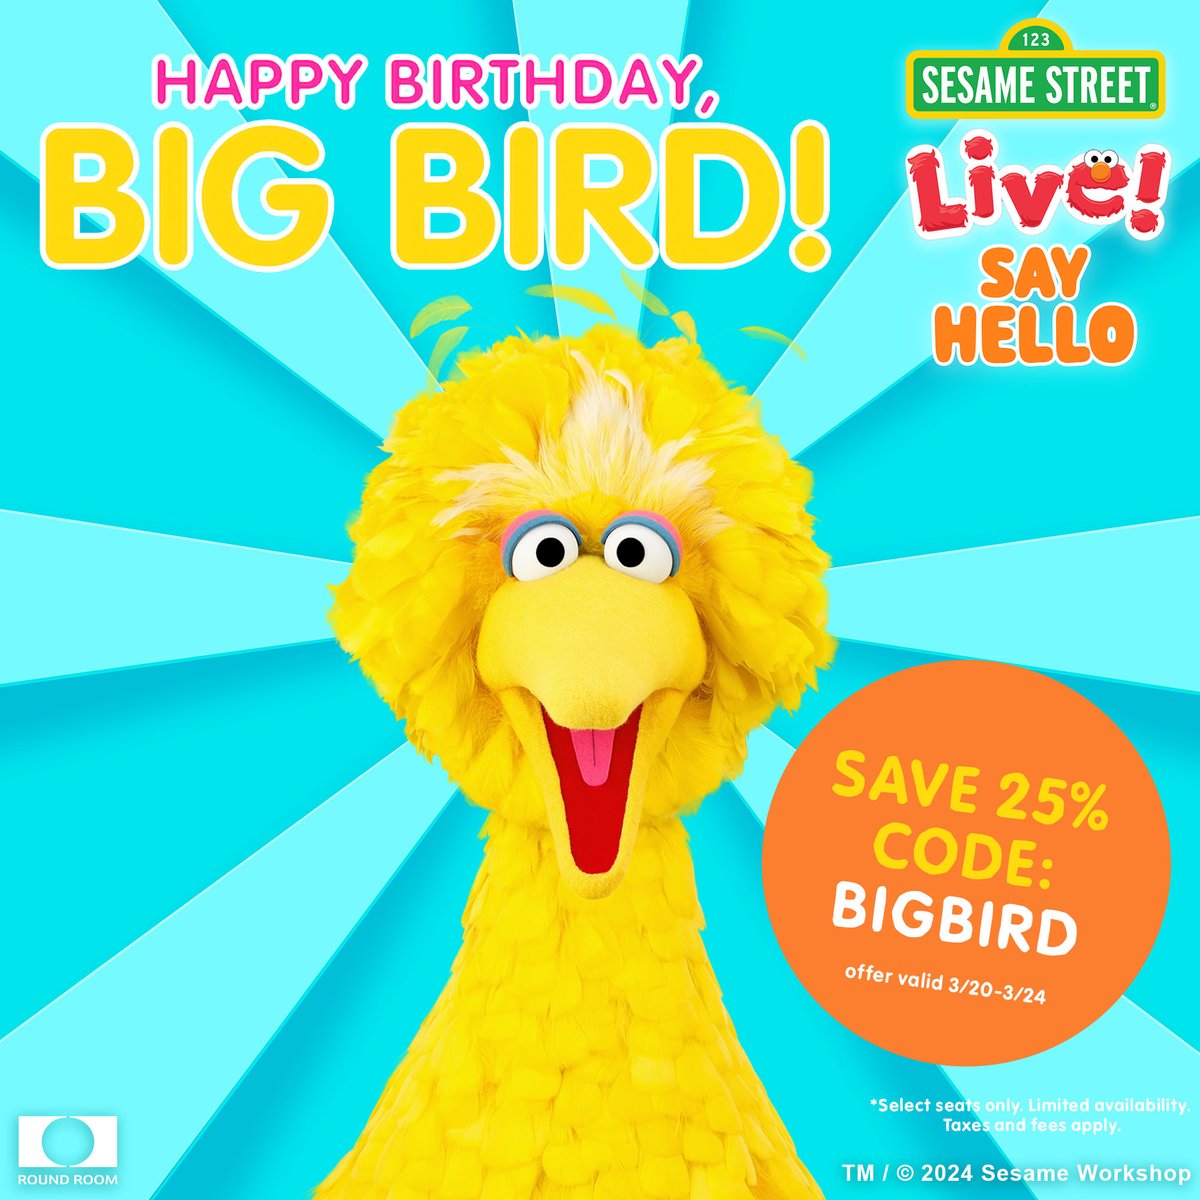 🎉 Sesame Street Live is celebrating Big Bird's Birthday by giving you a special ticket offer! 🎂 Enjoy 25% off with code BIGBIRD. Hurry, offer won't last long!